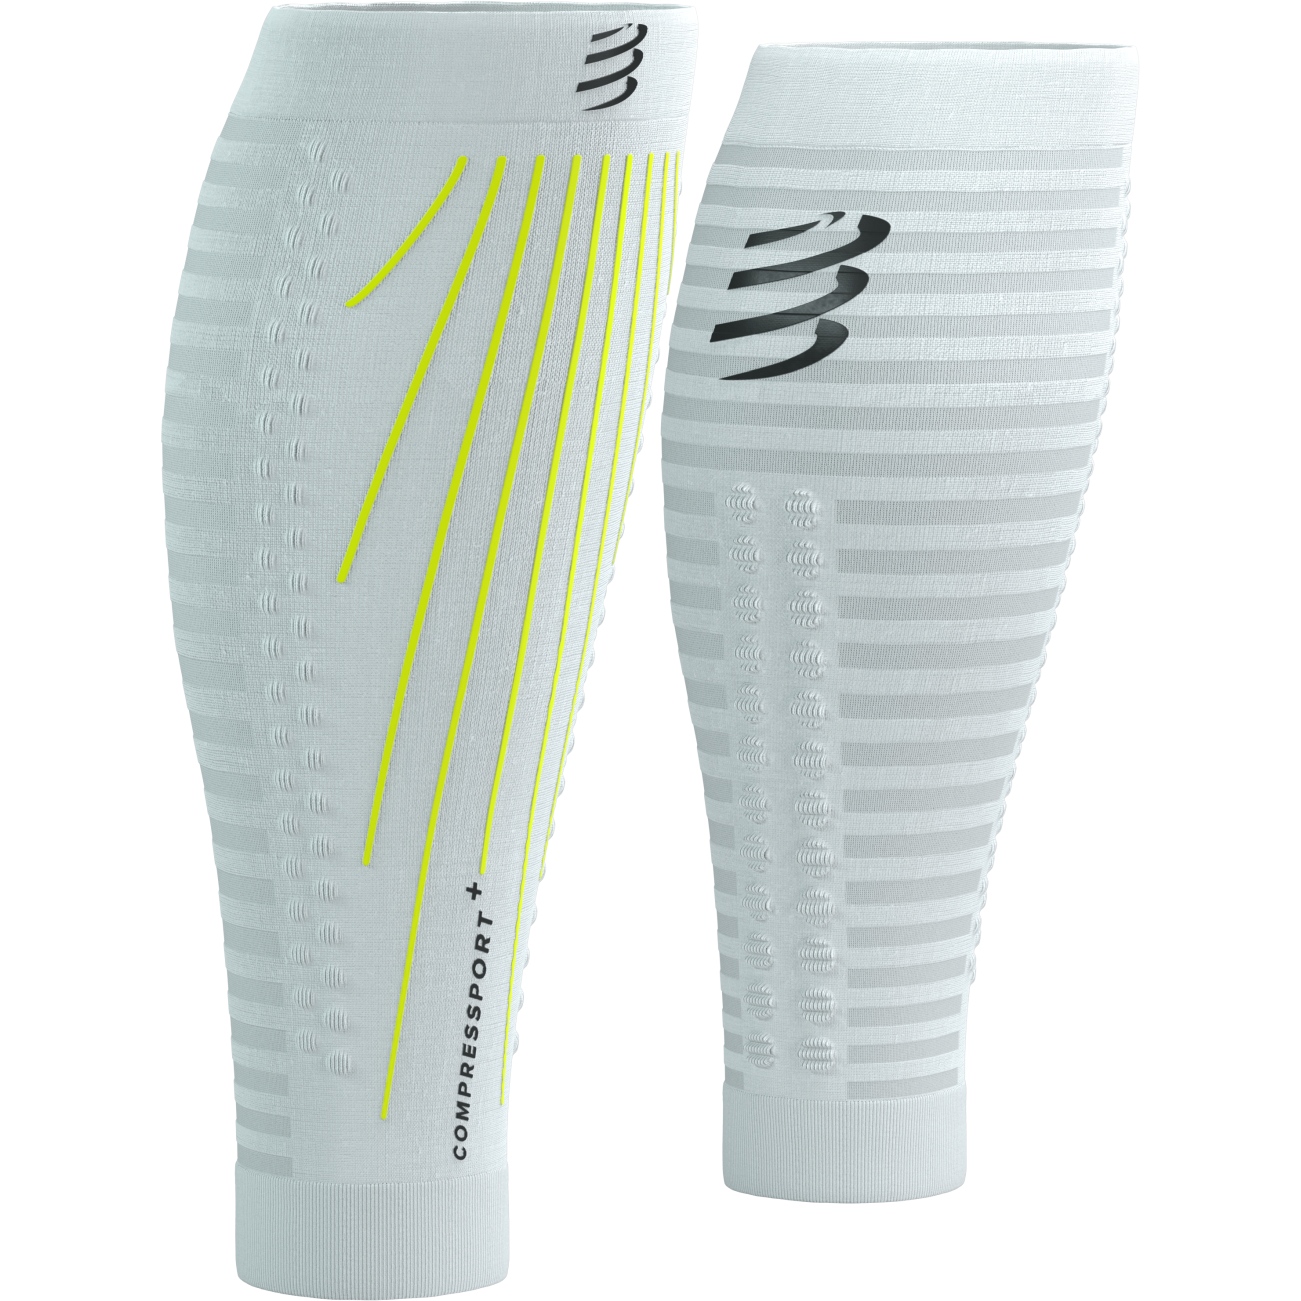 Image of Compressport R2 Aero Compression Calf Sleeves - white/safety yellow